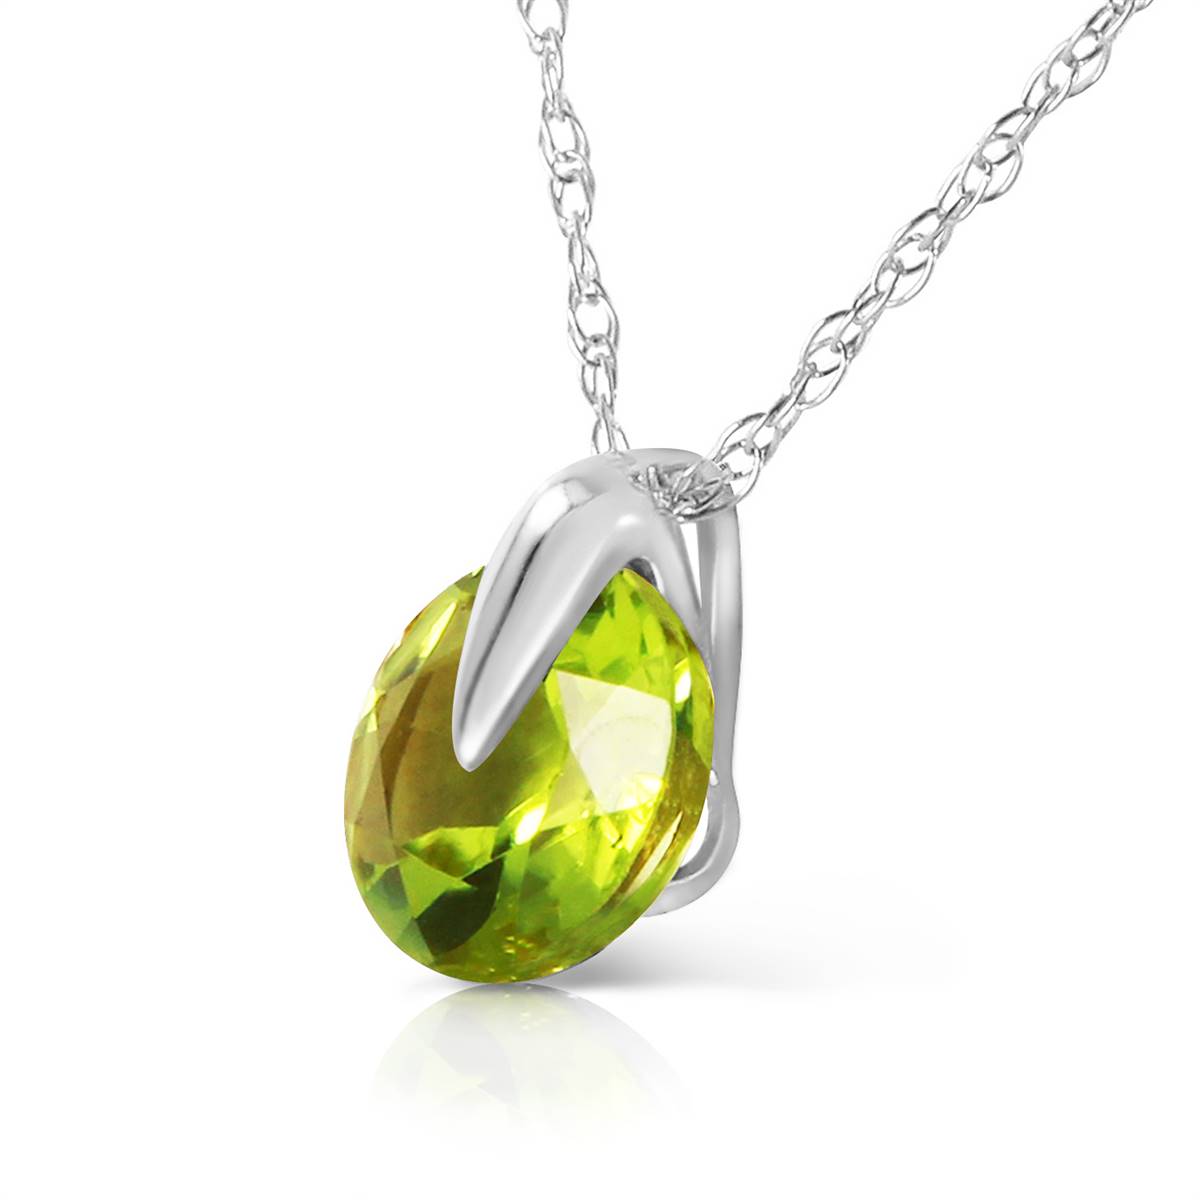 1 Carat 14K Solid White Gold Unchain My Mind Peridot Necklace